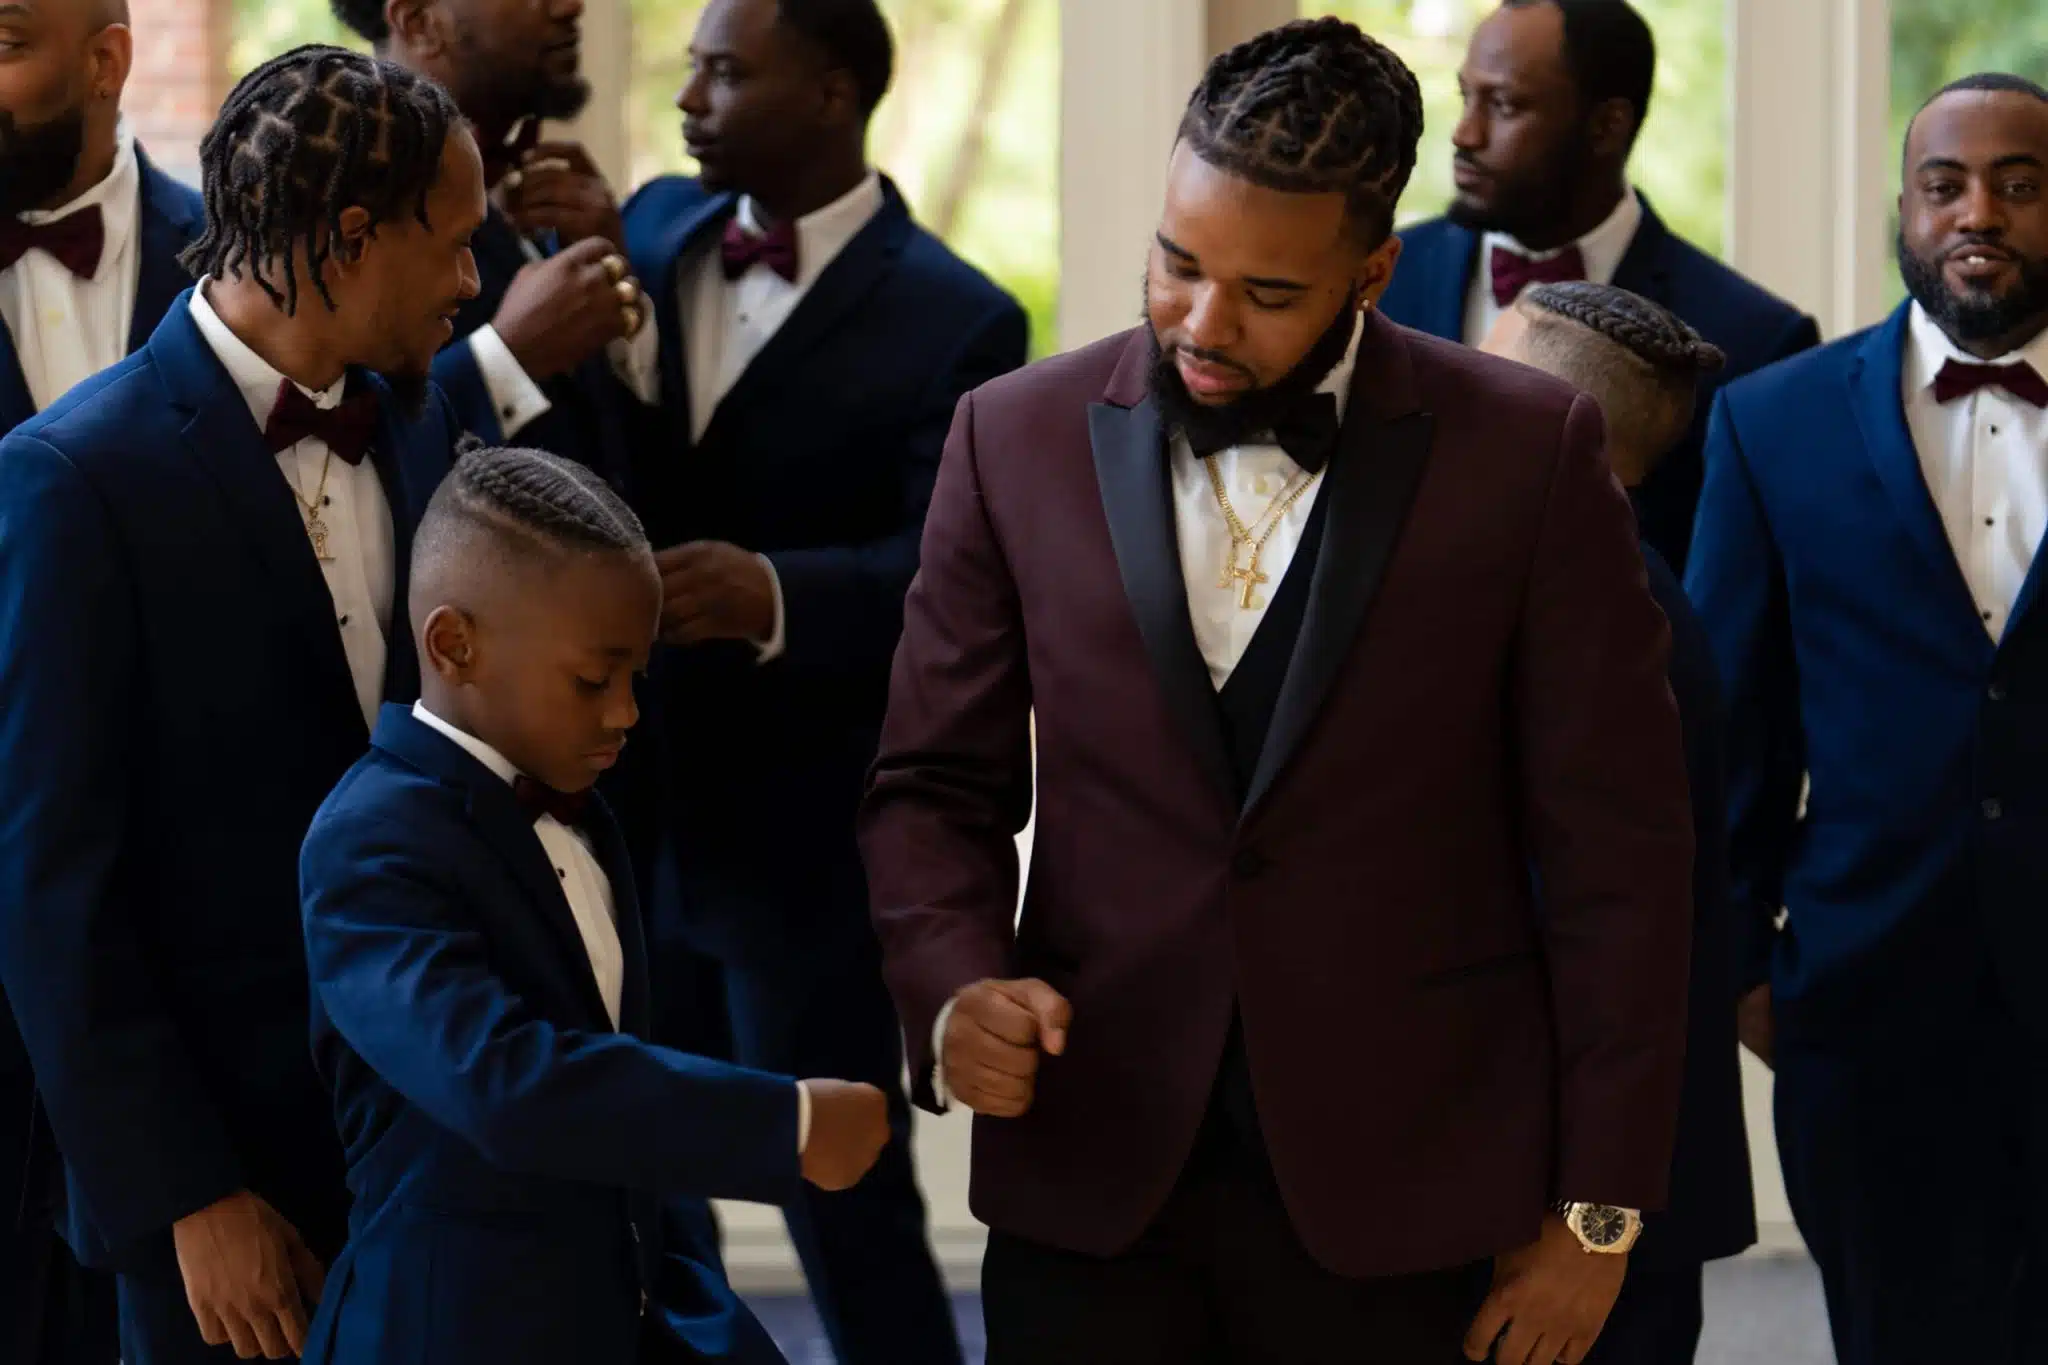 Man and son give each other a pound at the father's wedding in charlotte, nc wedding venue. The man is wearing a red suit with a black tie for his wedding day. Planning your first wedding starts here.